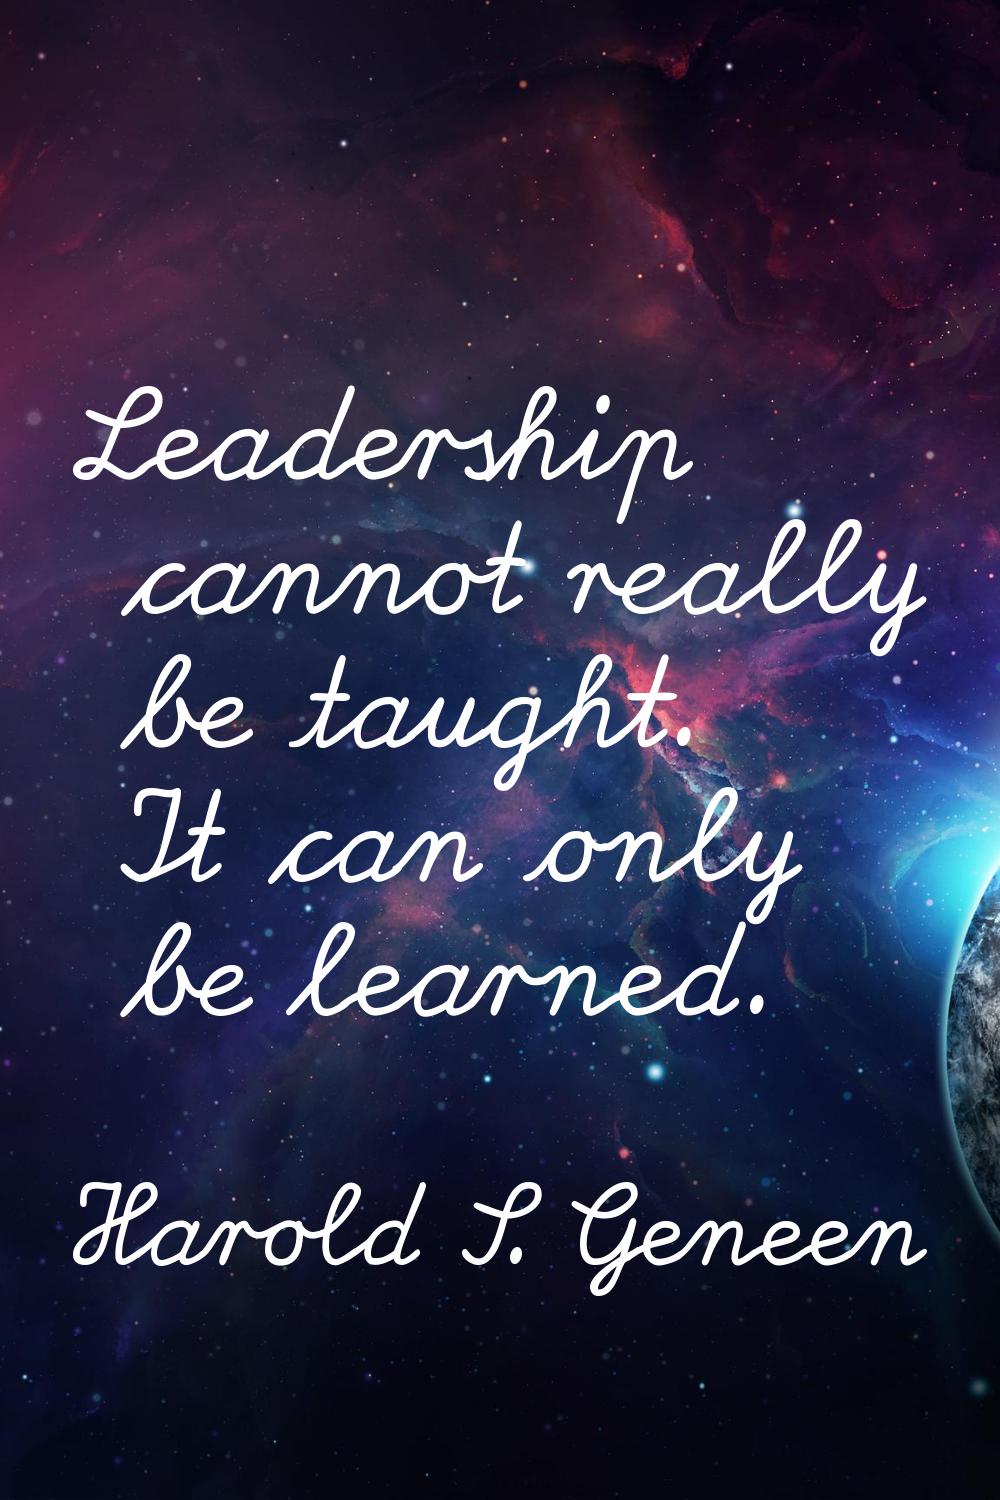 Leadership cannot really be taught. It can only be learned.